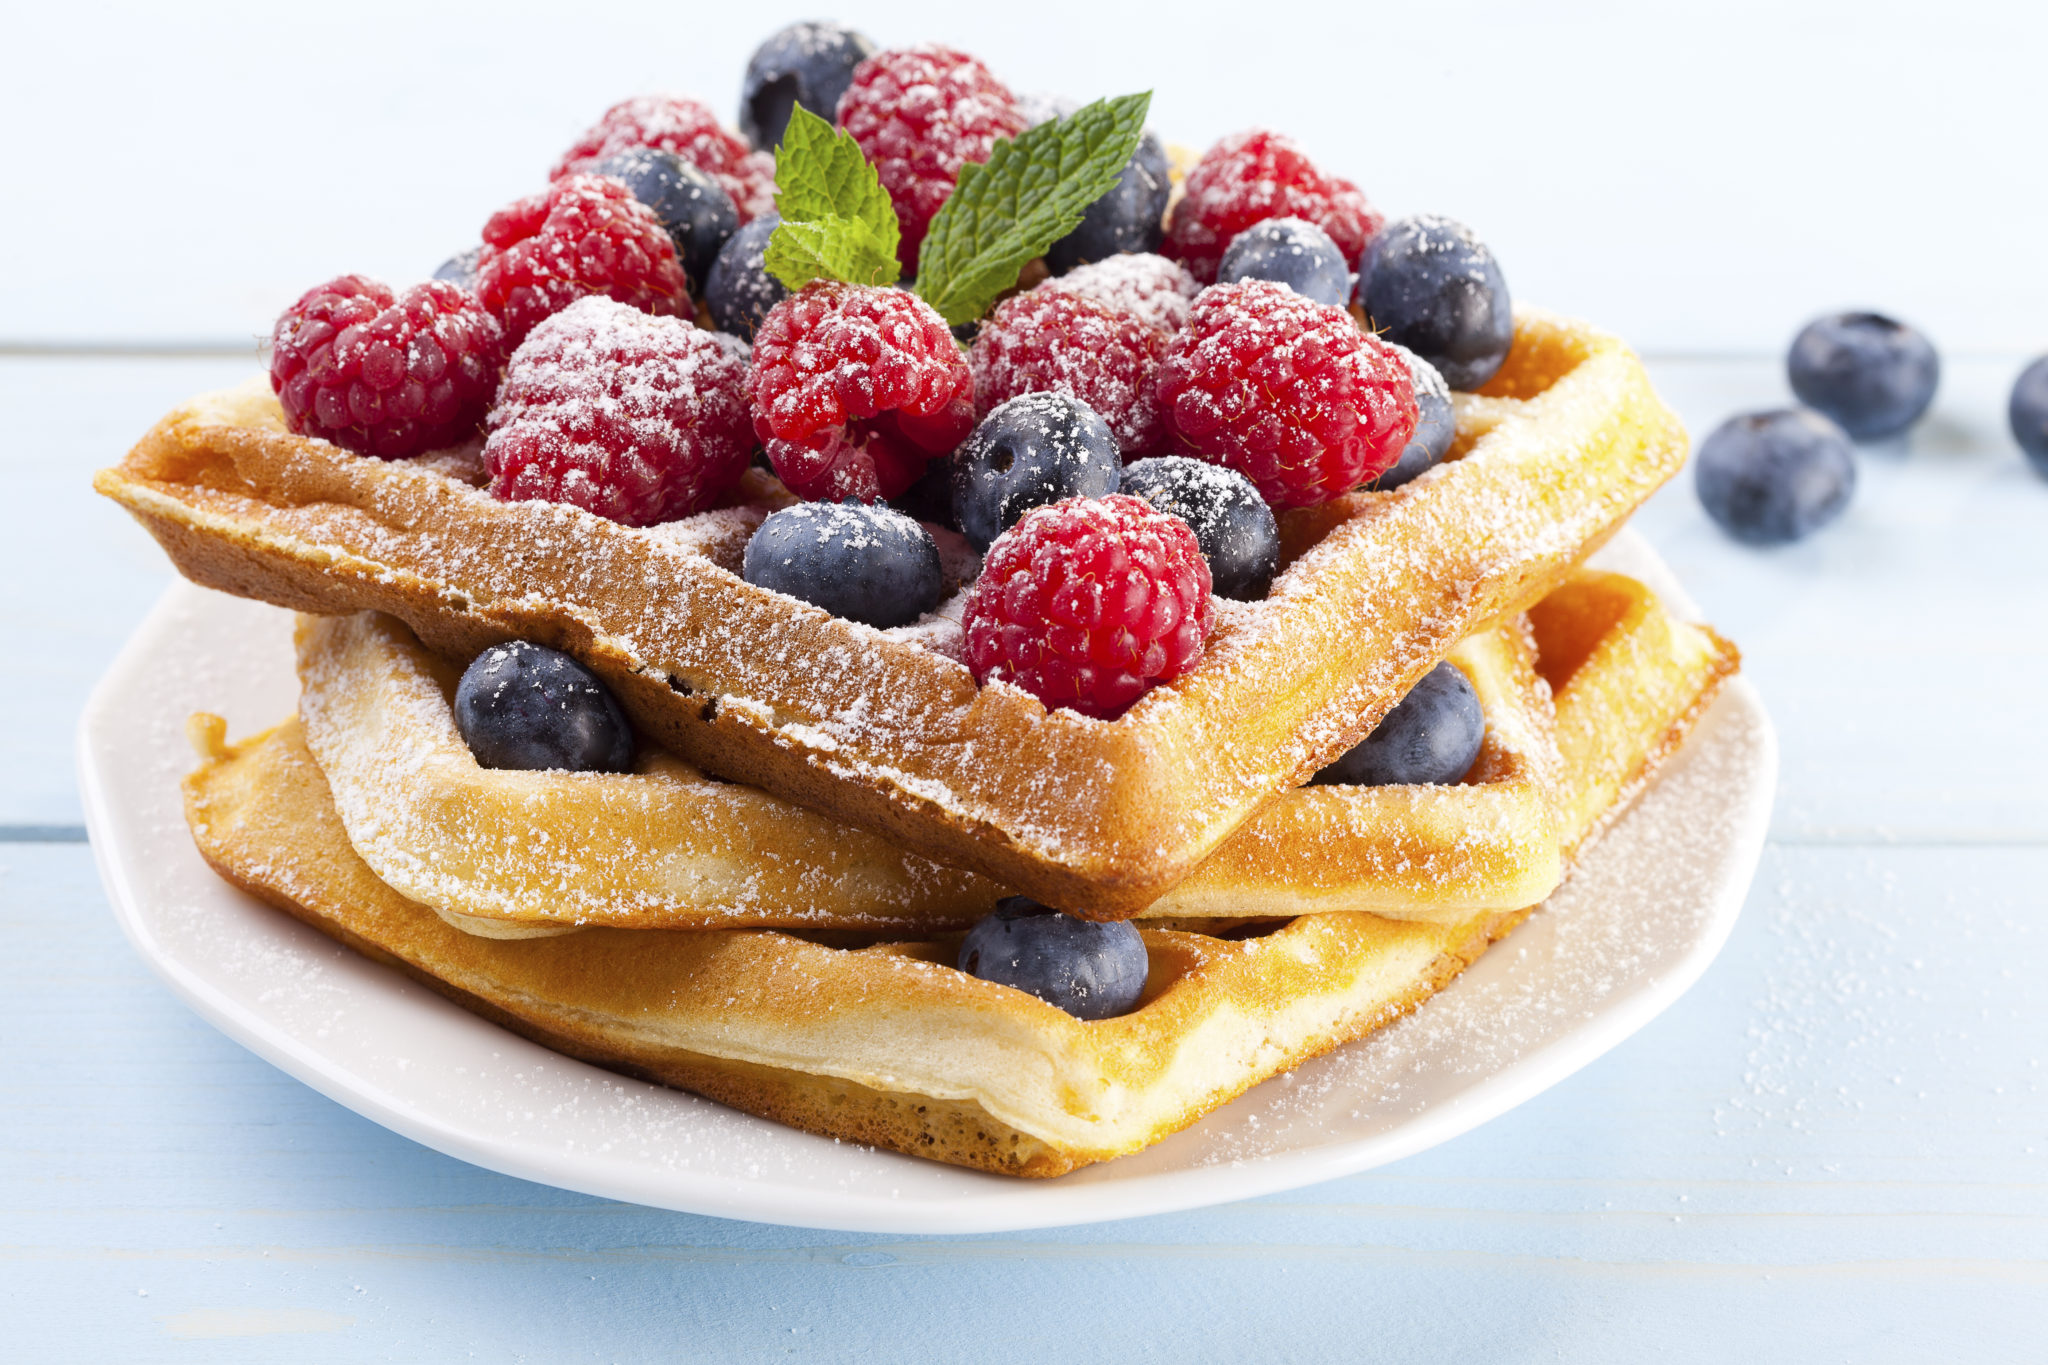 Pair your homemade waffles with fresh fruit. 